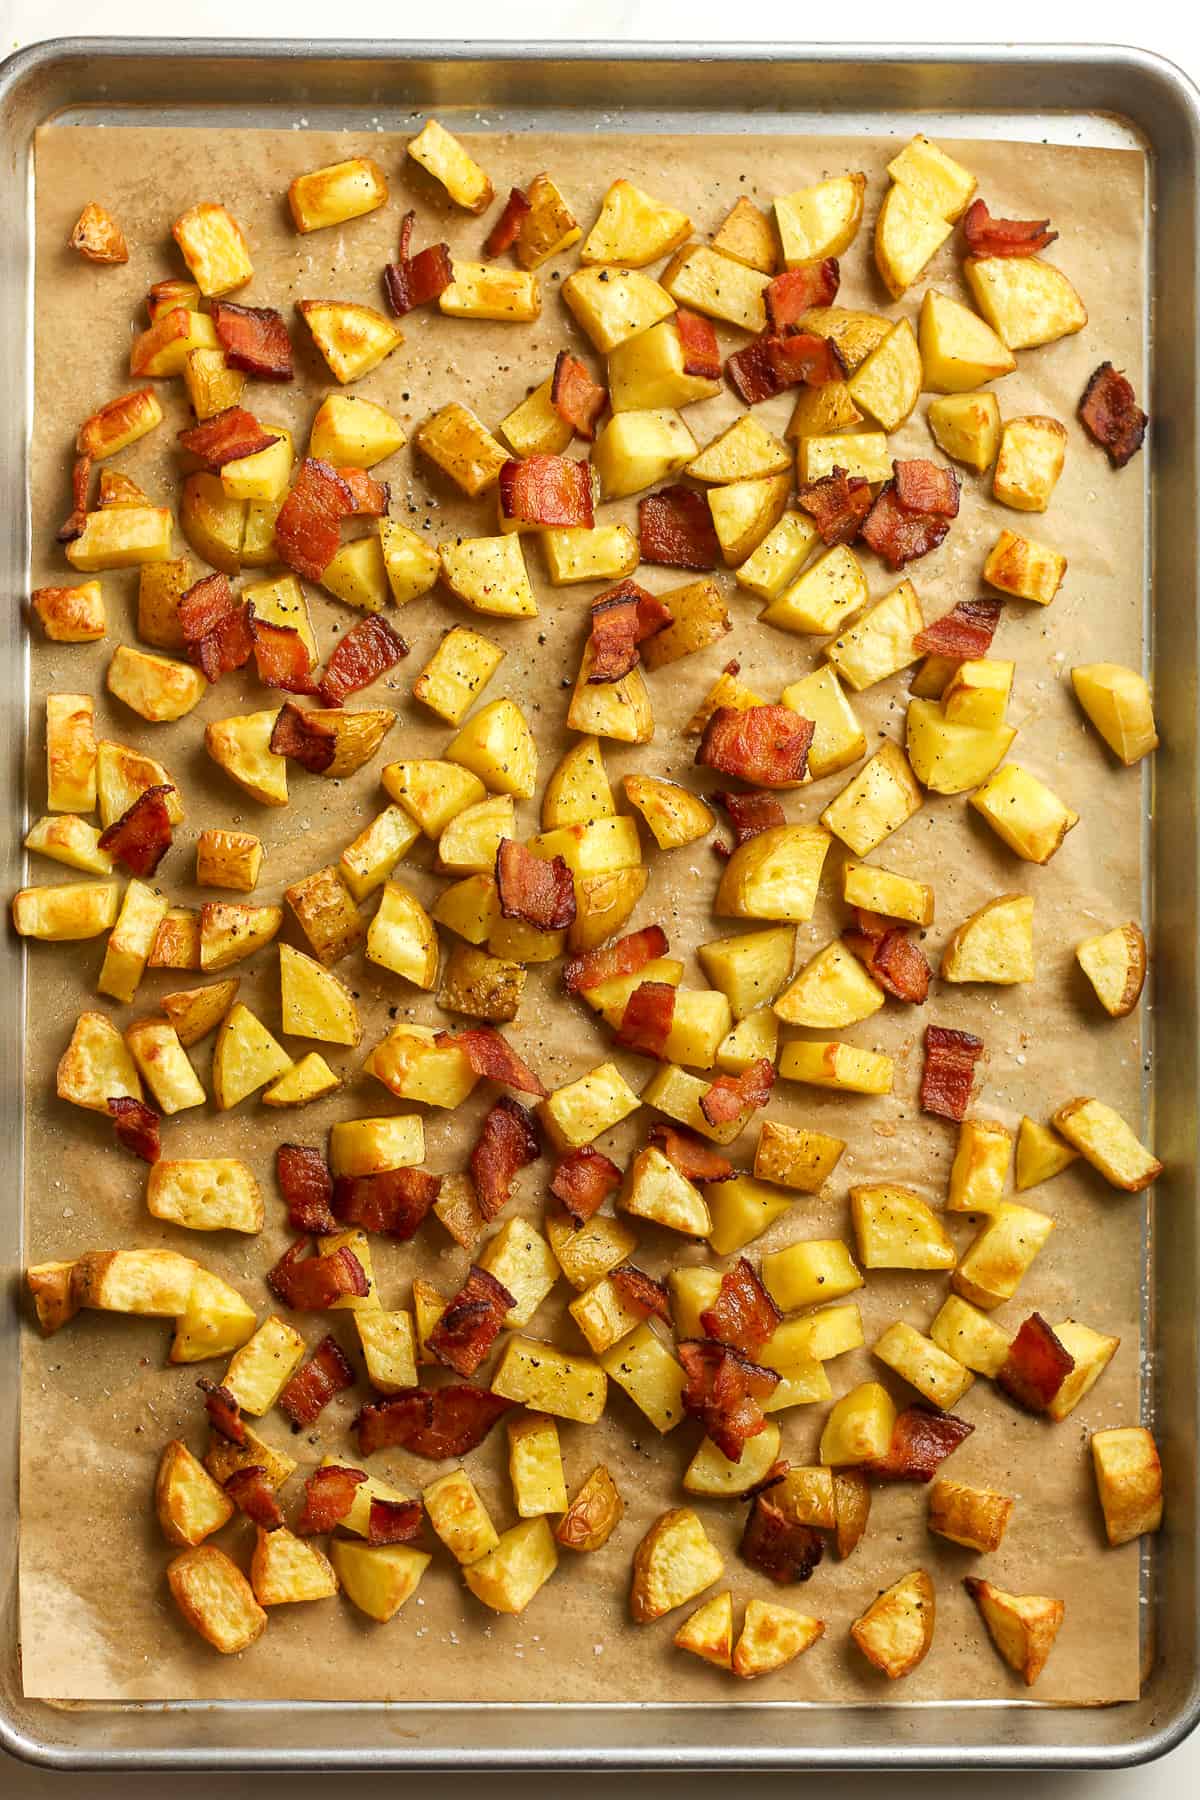 A pan of roasted potatoes and chopped bacon.